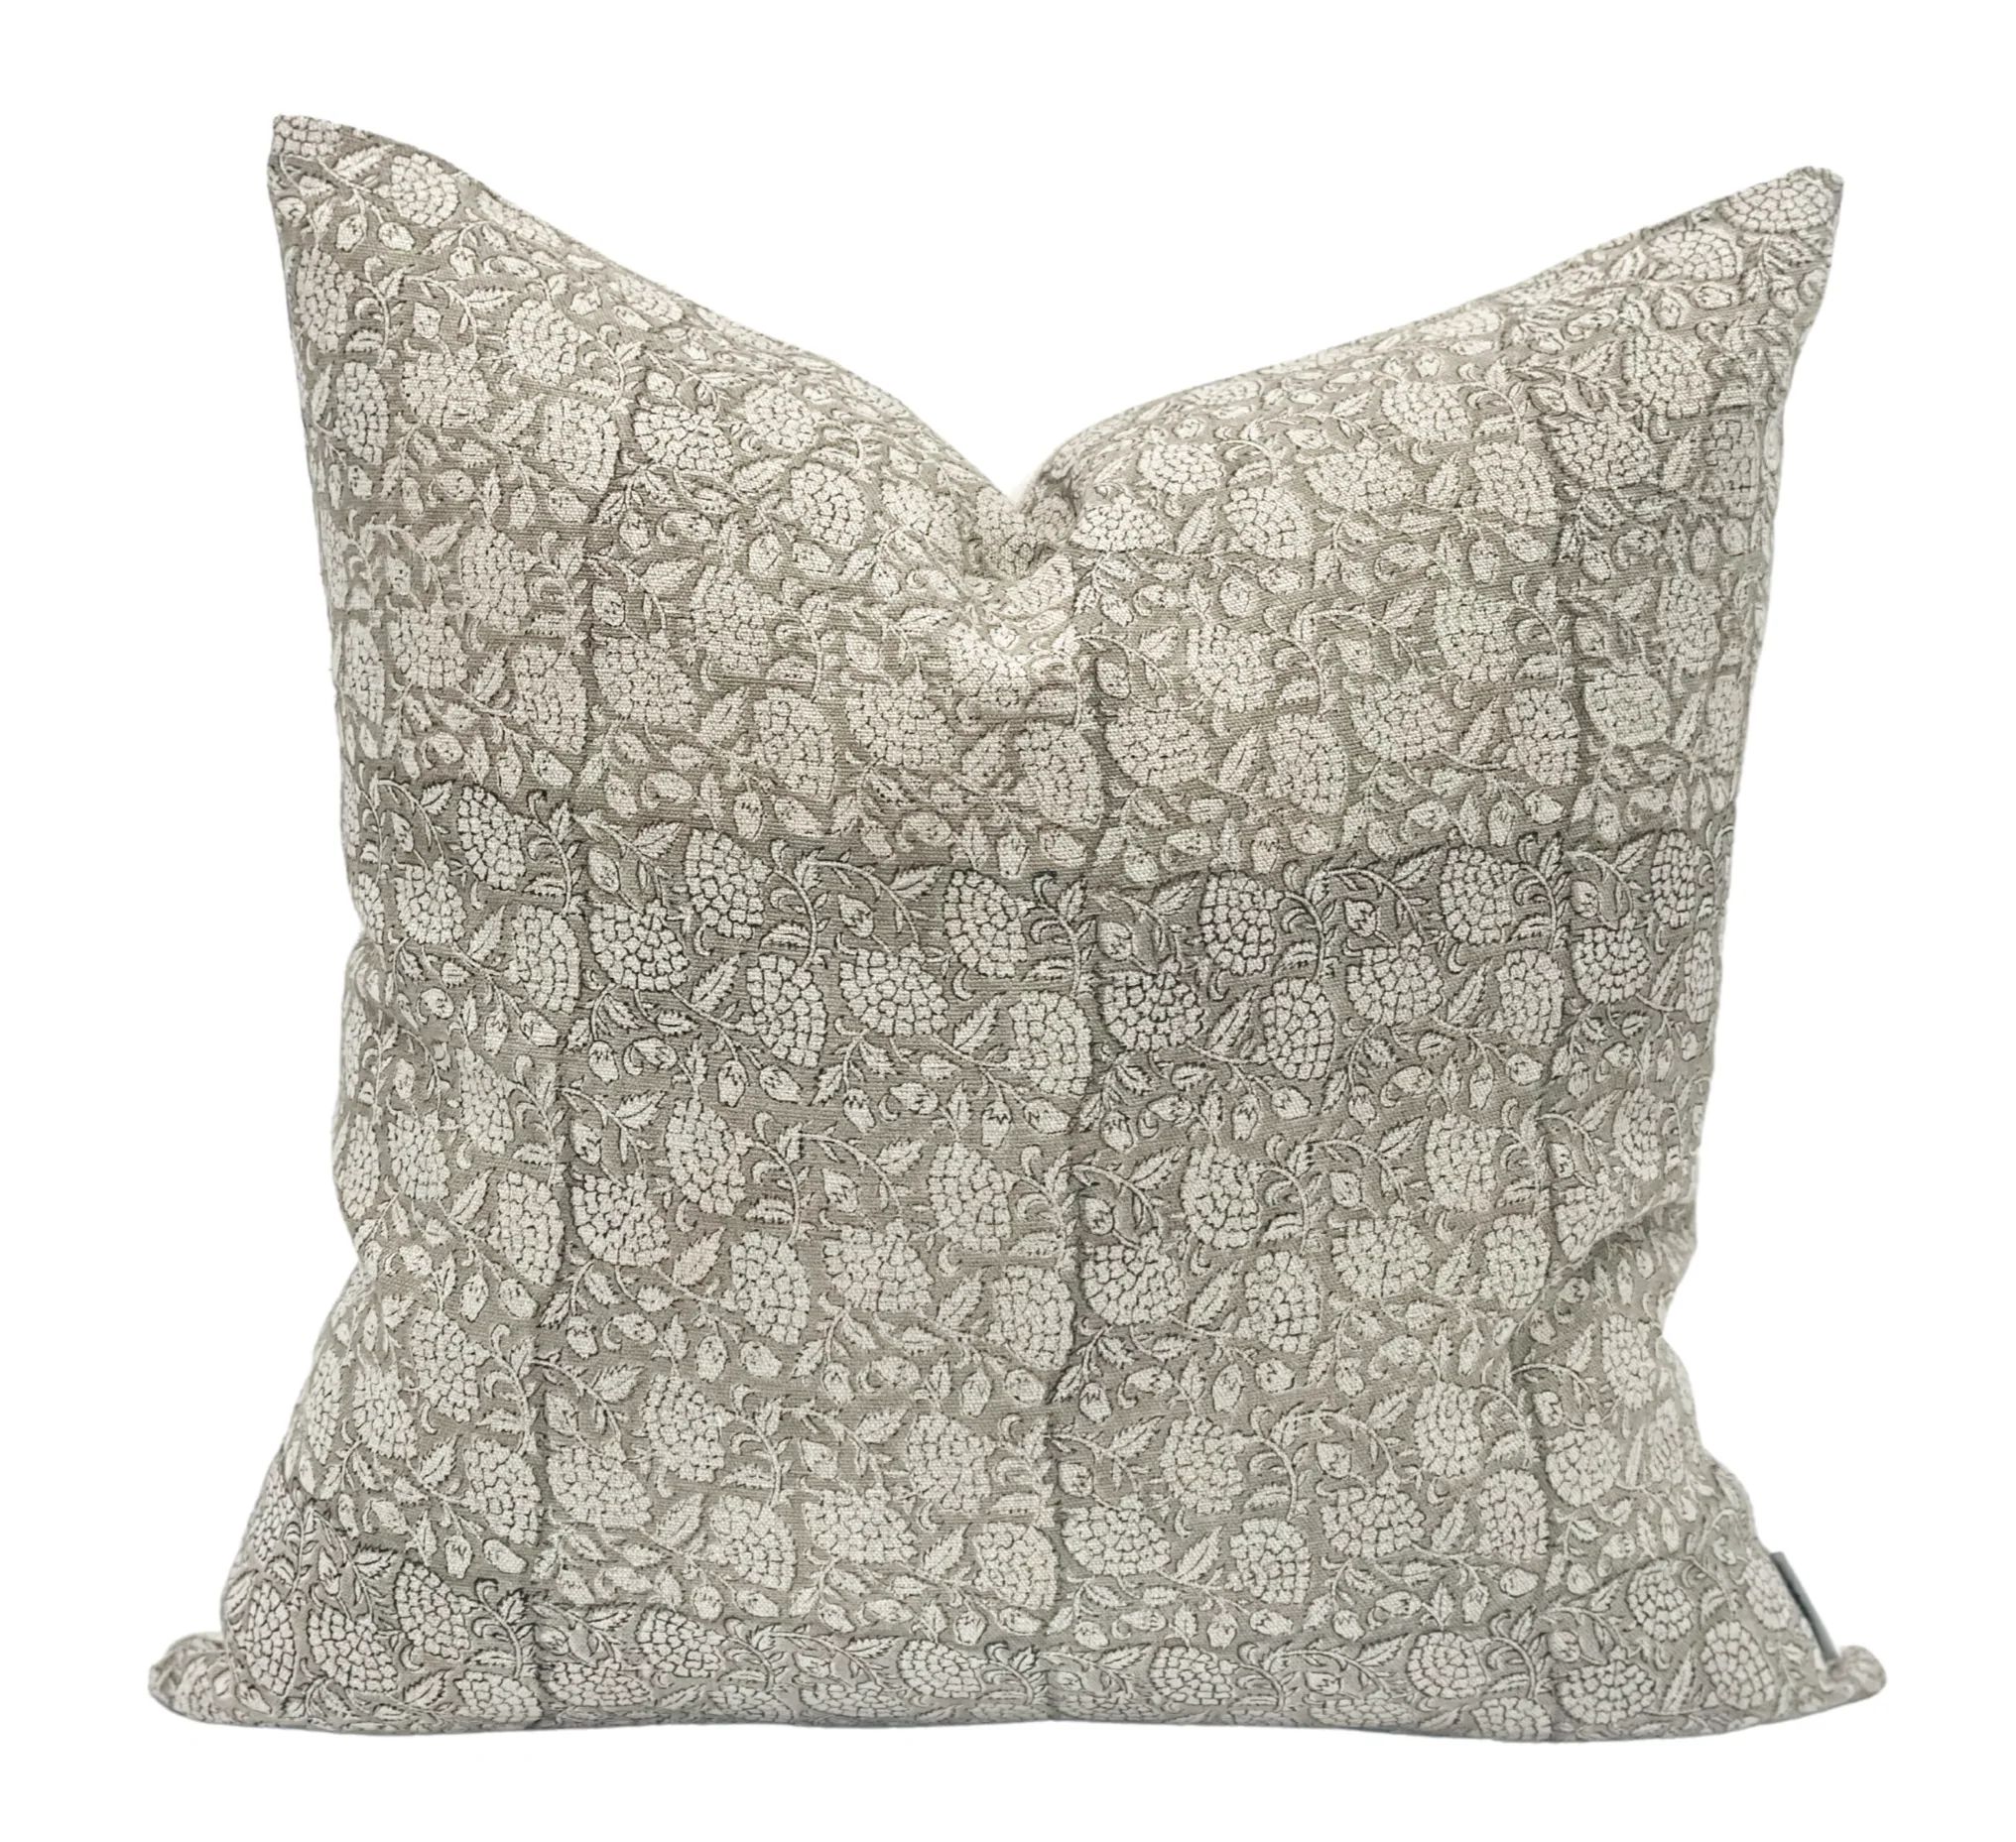 CHLOE IN Soft Grey on Natural Linen Pillow Cover | Krinto